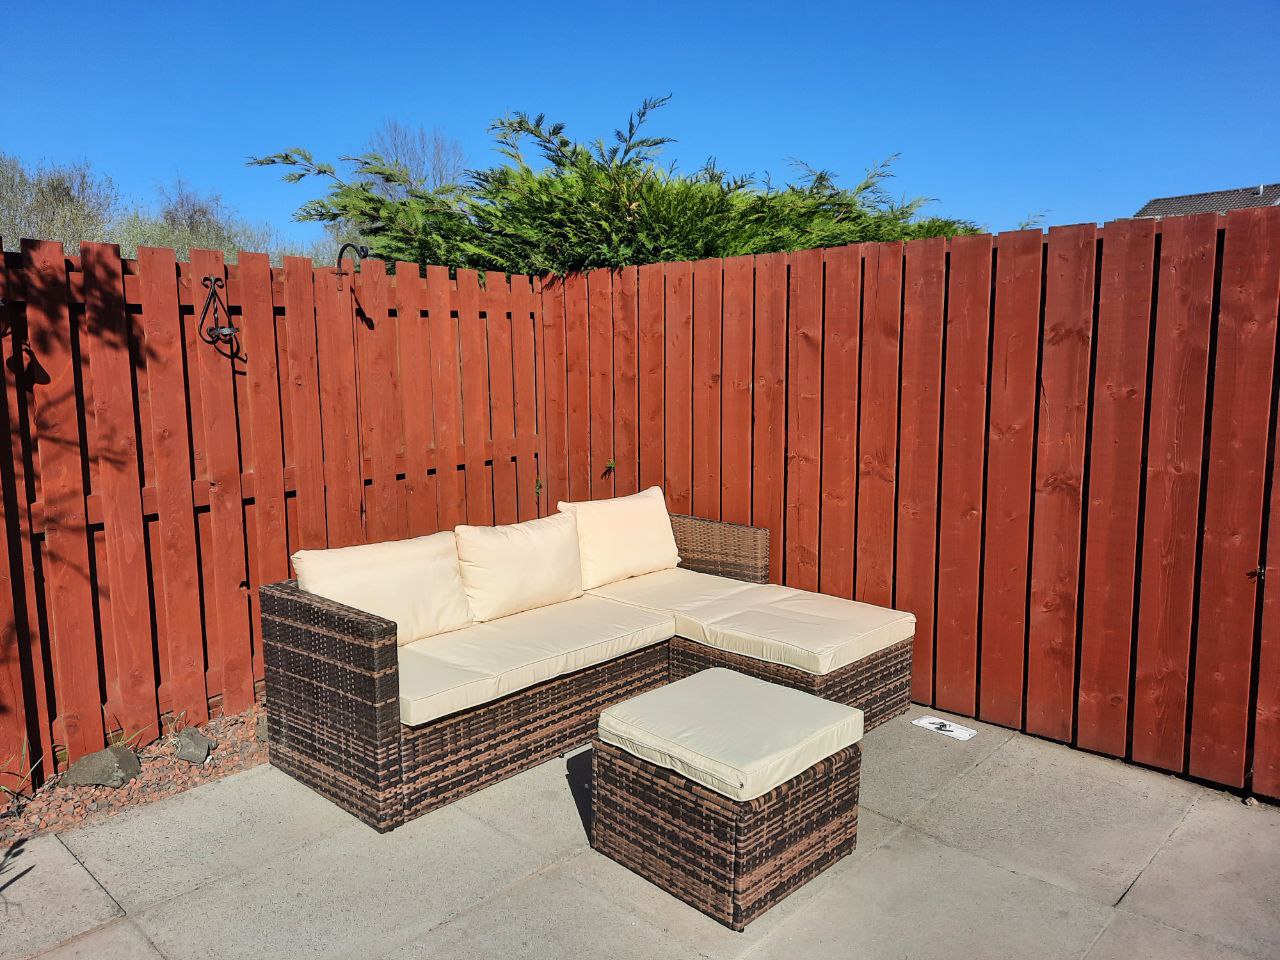 This garden sofa comes with six nice comfy cushions which can easily be removed and washed creating an excellent area to relax in the sun with your feet up. Garden furniture assembly by Flat Pack Happy.